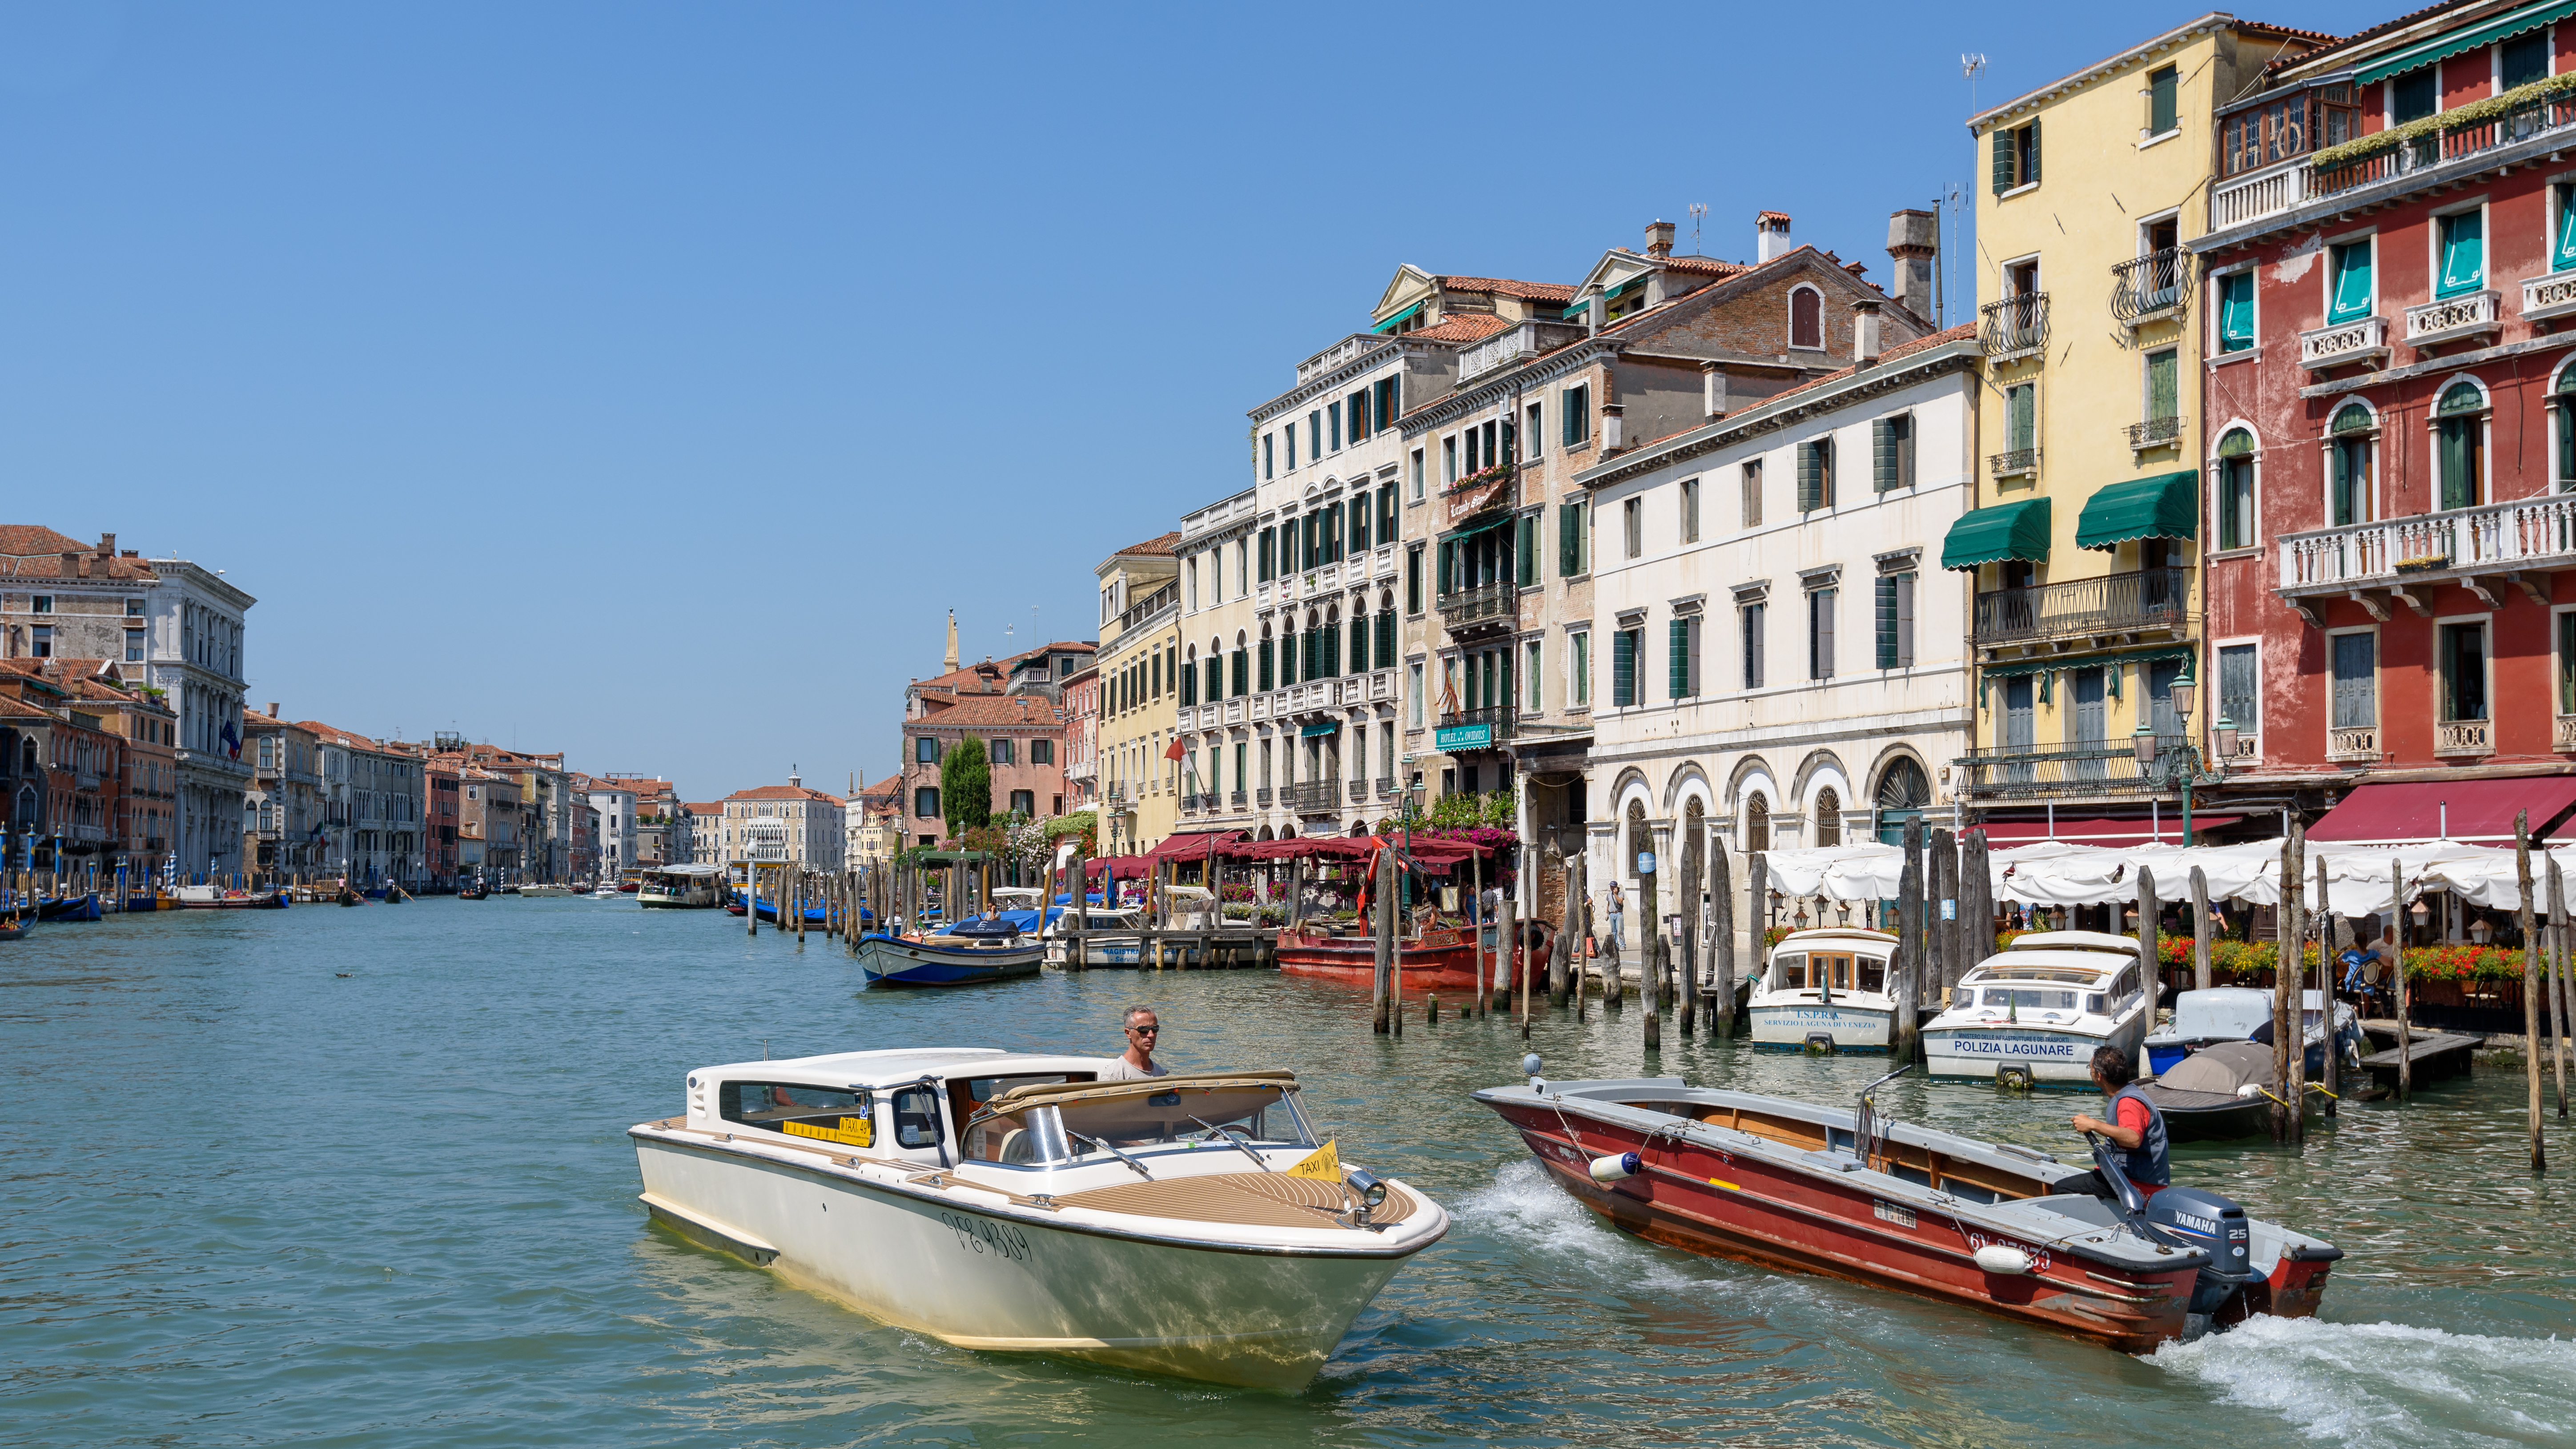 The grand canal, venice photo